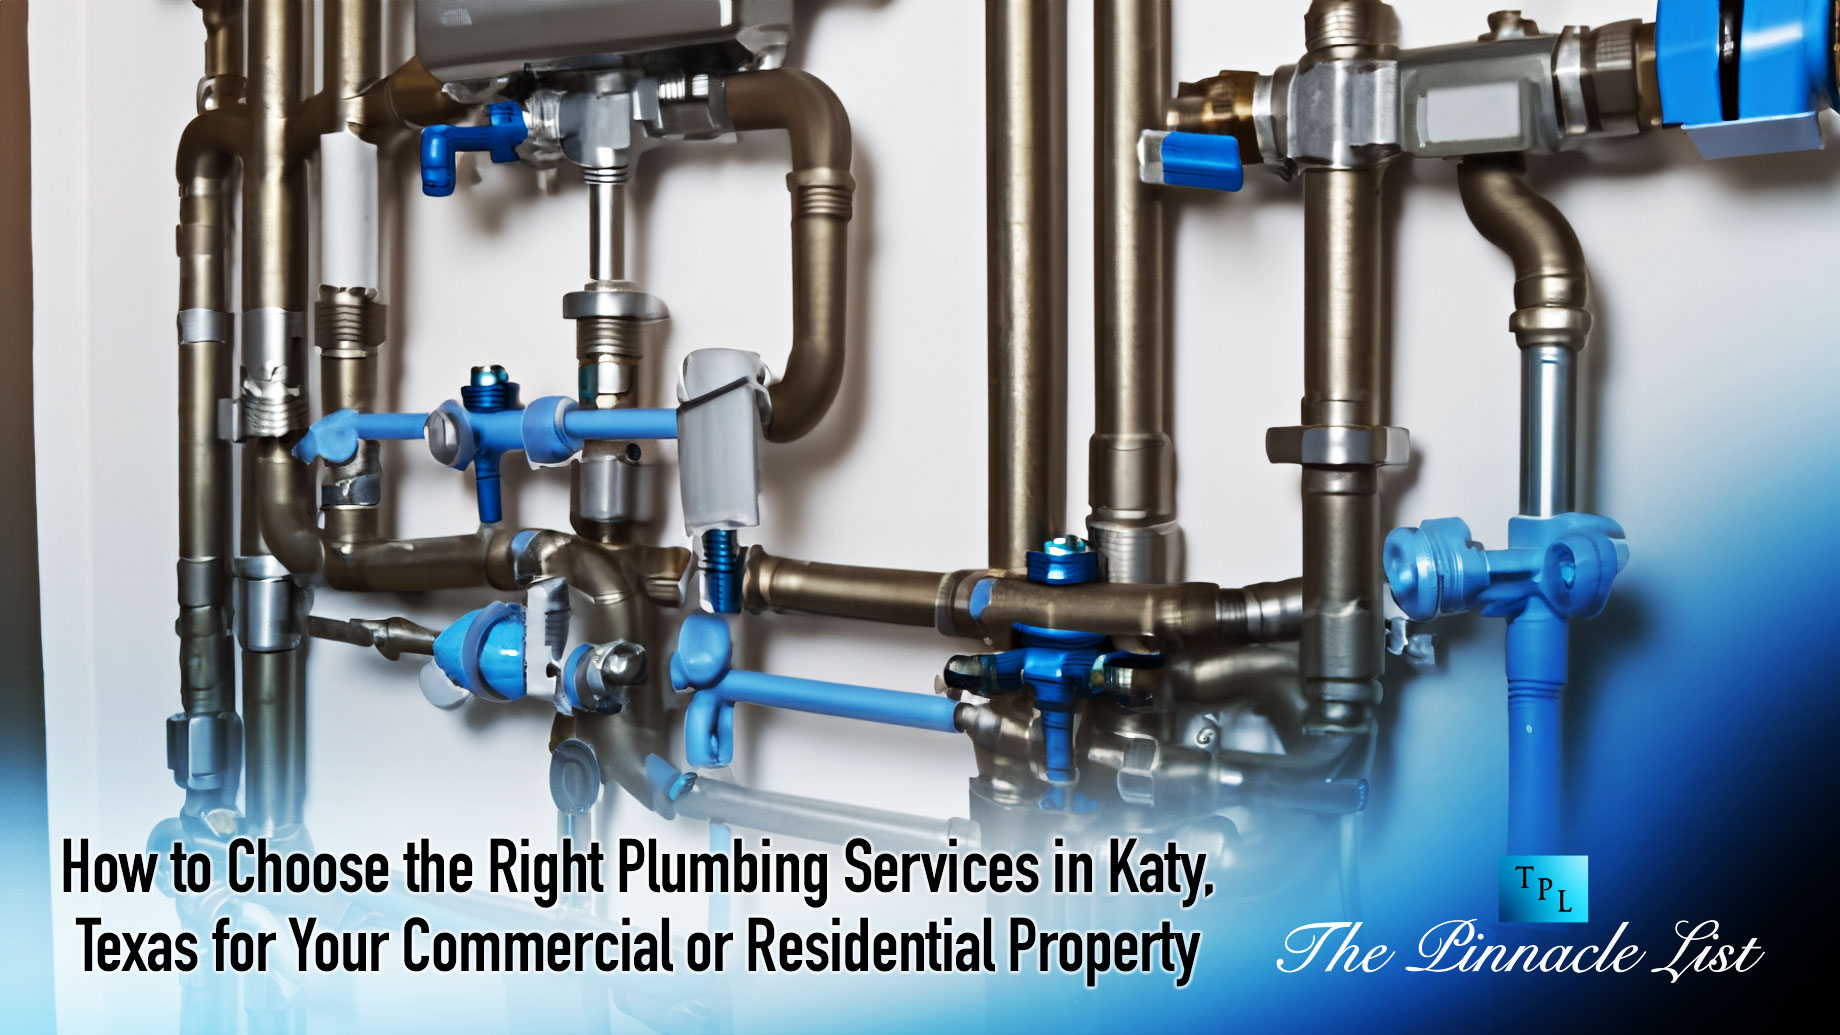 How to Choose the Right Plumbing Services in Katy, Texas for Your Commercial or Residential Property